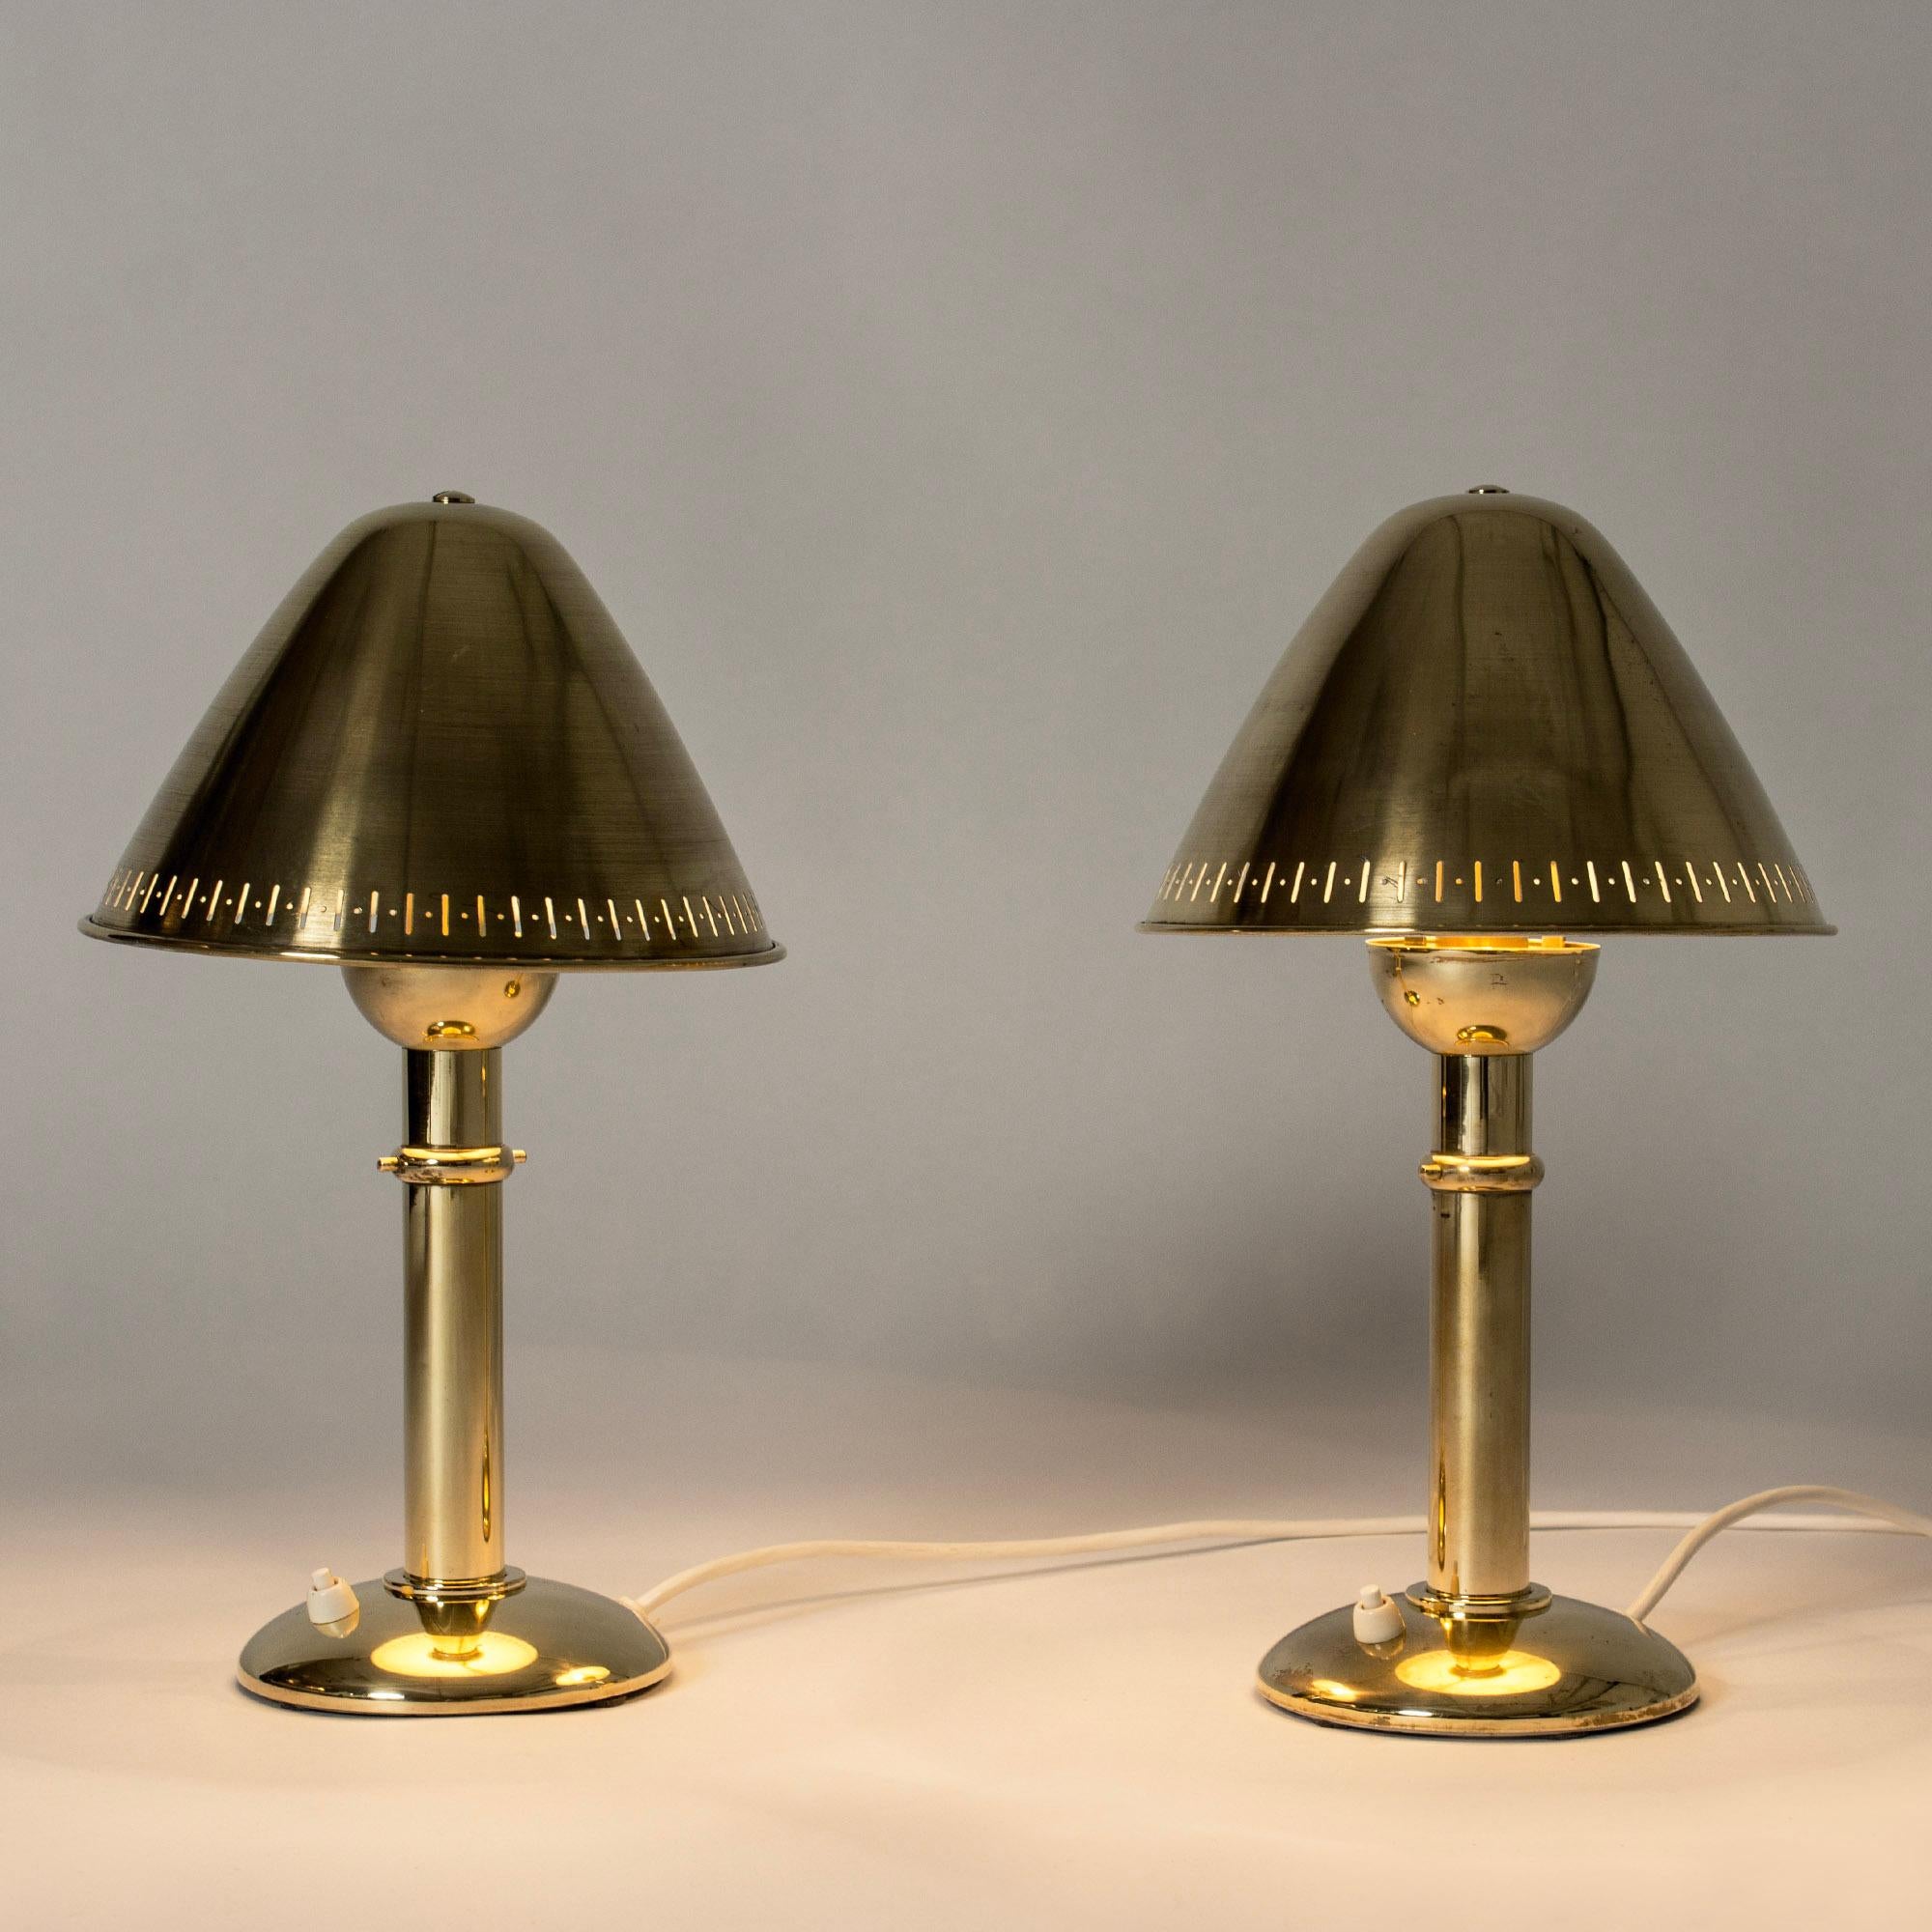 Pair of striking table lamps from ASEA, made completely from brass. Cool, clean design with shades that can be adjusted to direct and soften the light.